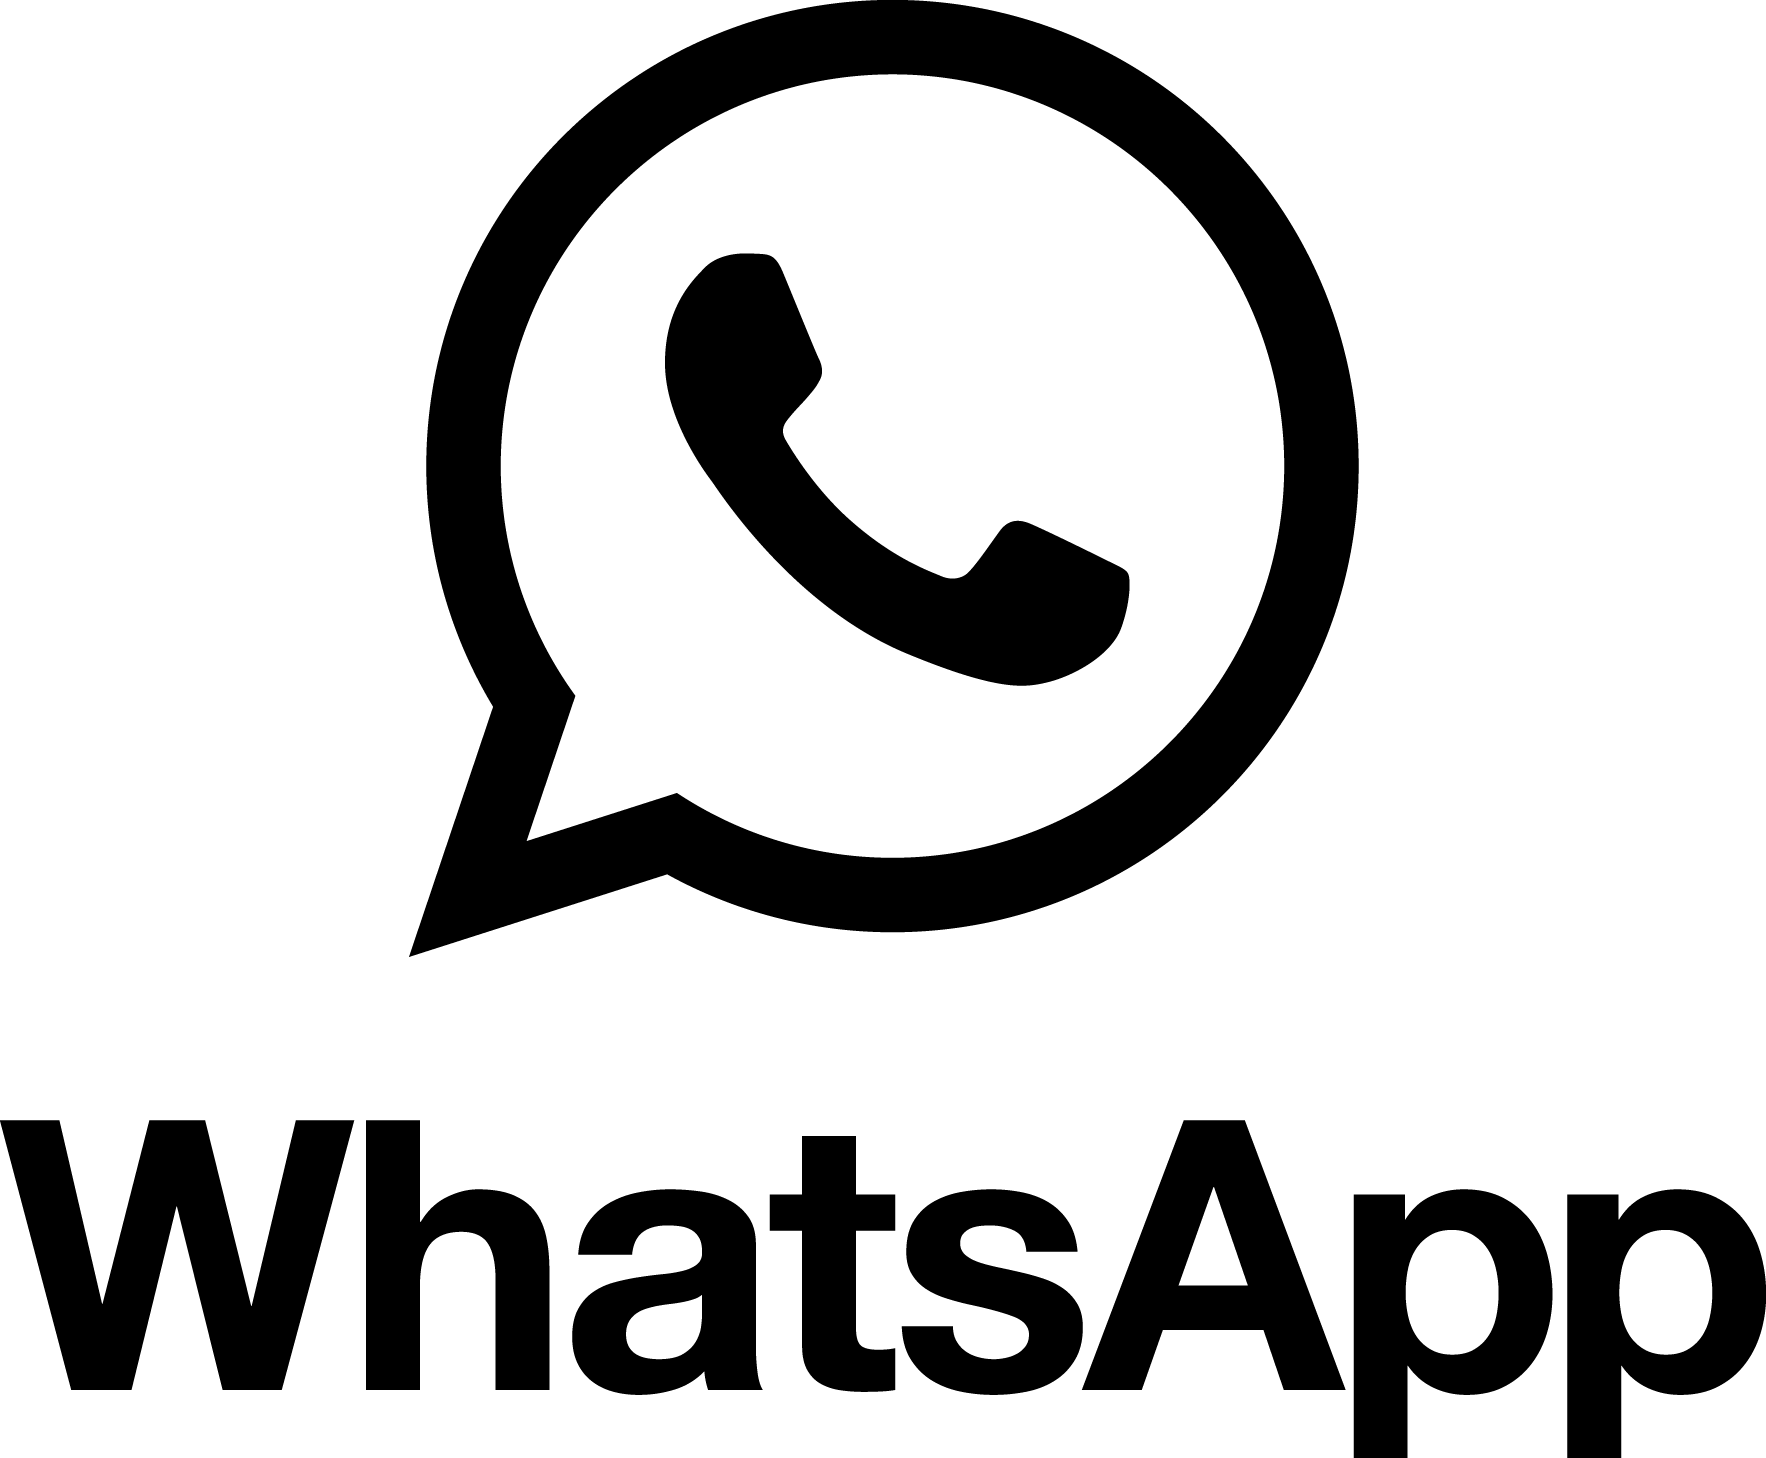 Whatsapp Logo - Whatsapp Logo】| Whatsapp Logo Design Icons Vector Download